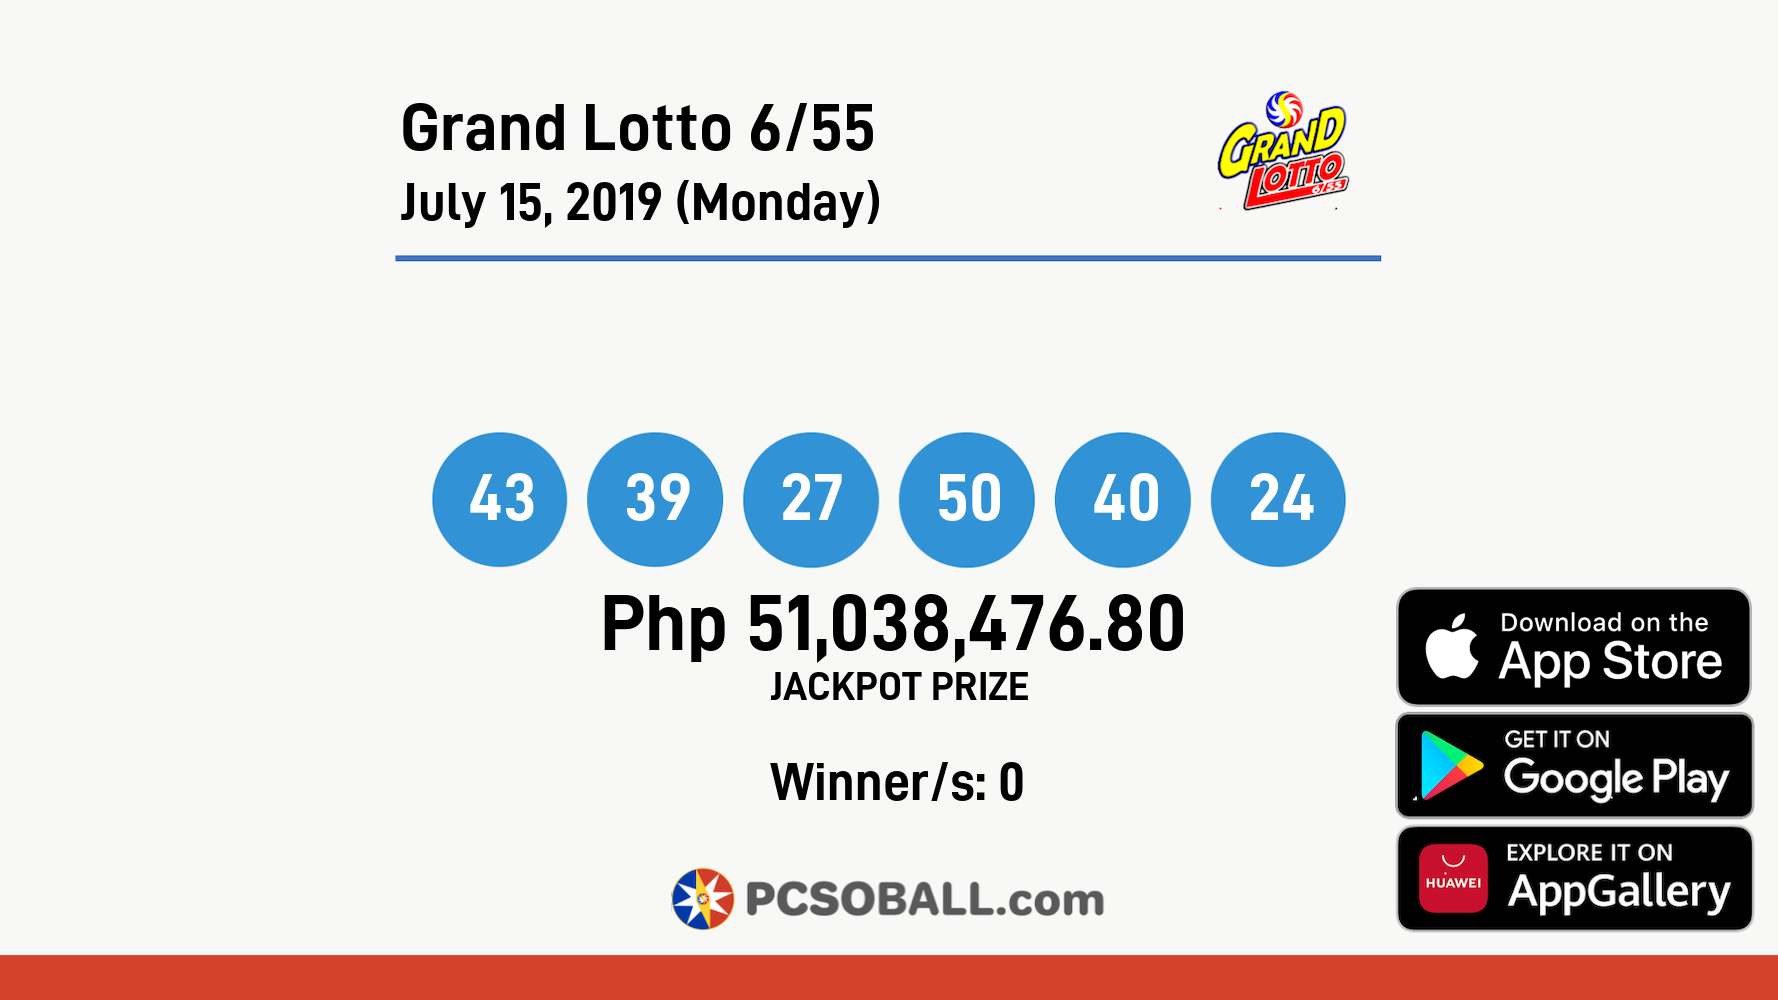 Grand Lotto 6/55 July 15, 2019 (Monday) Result